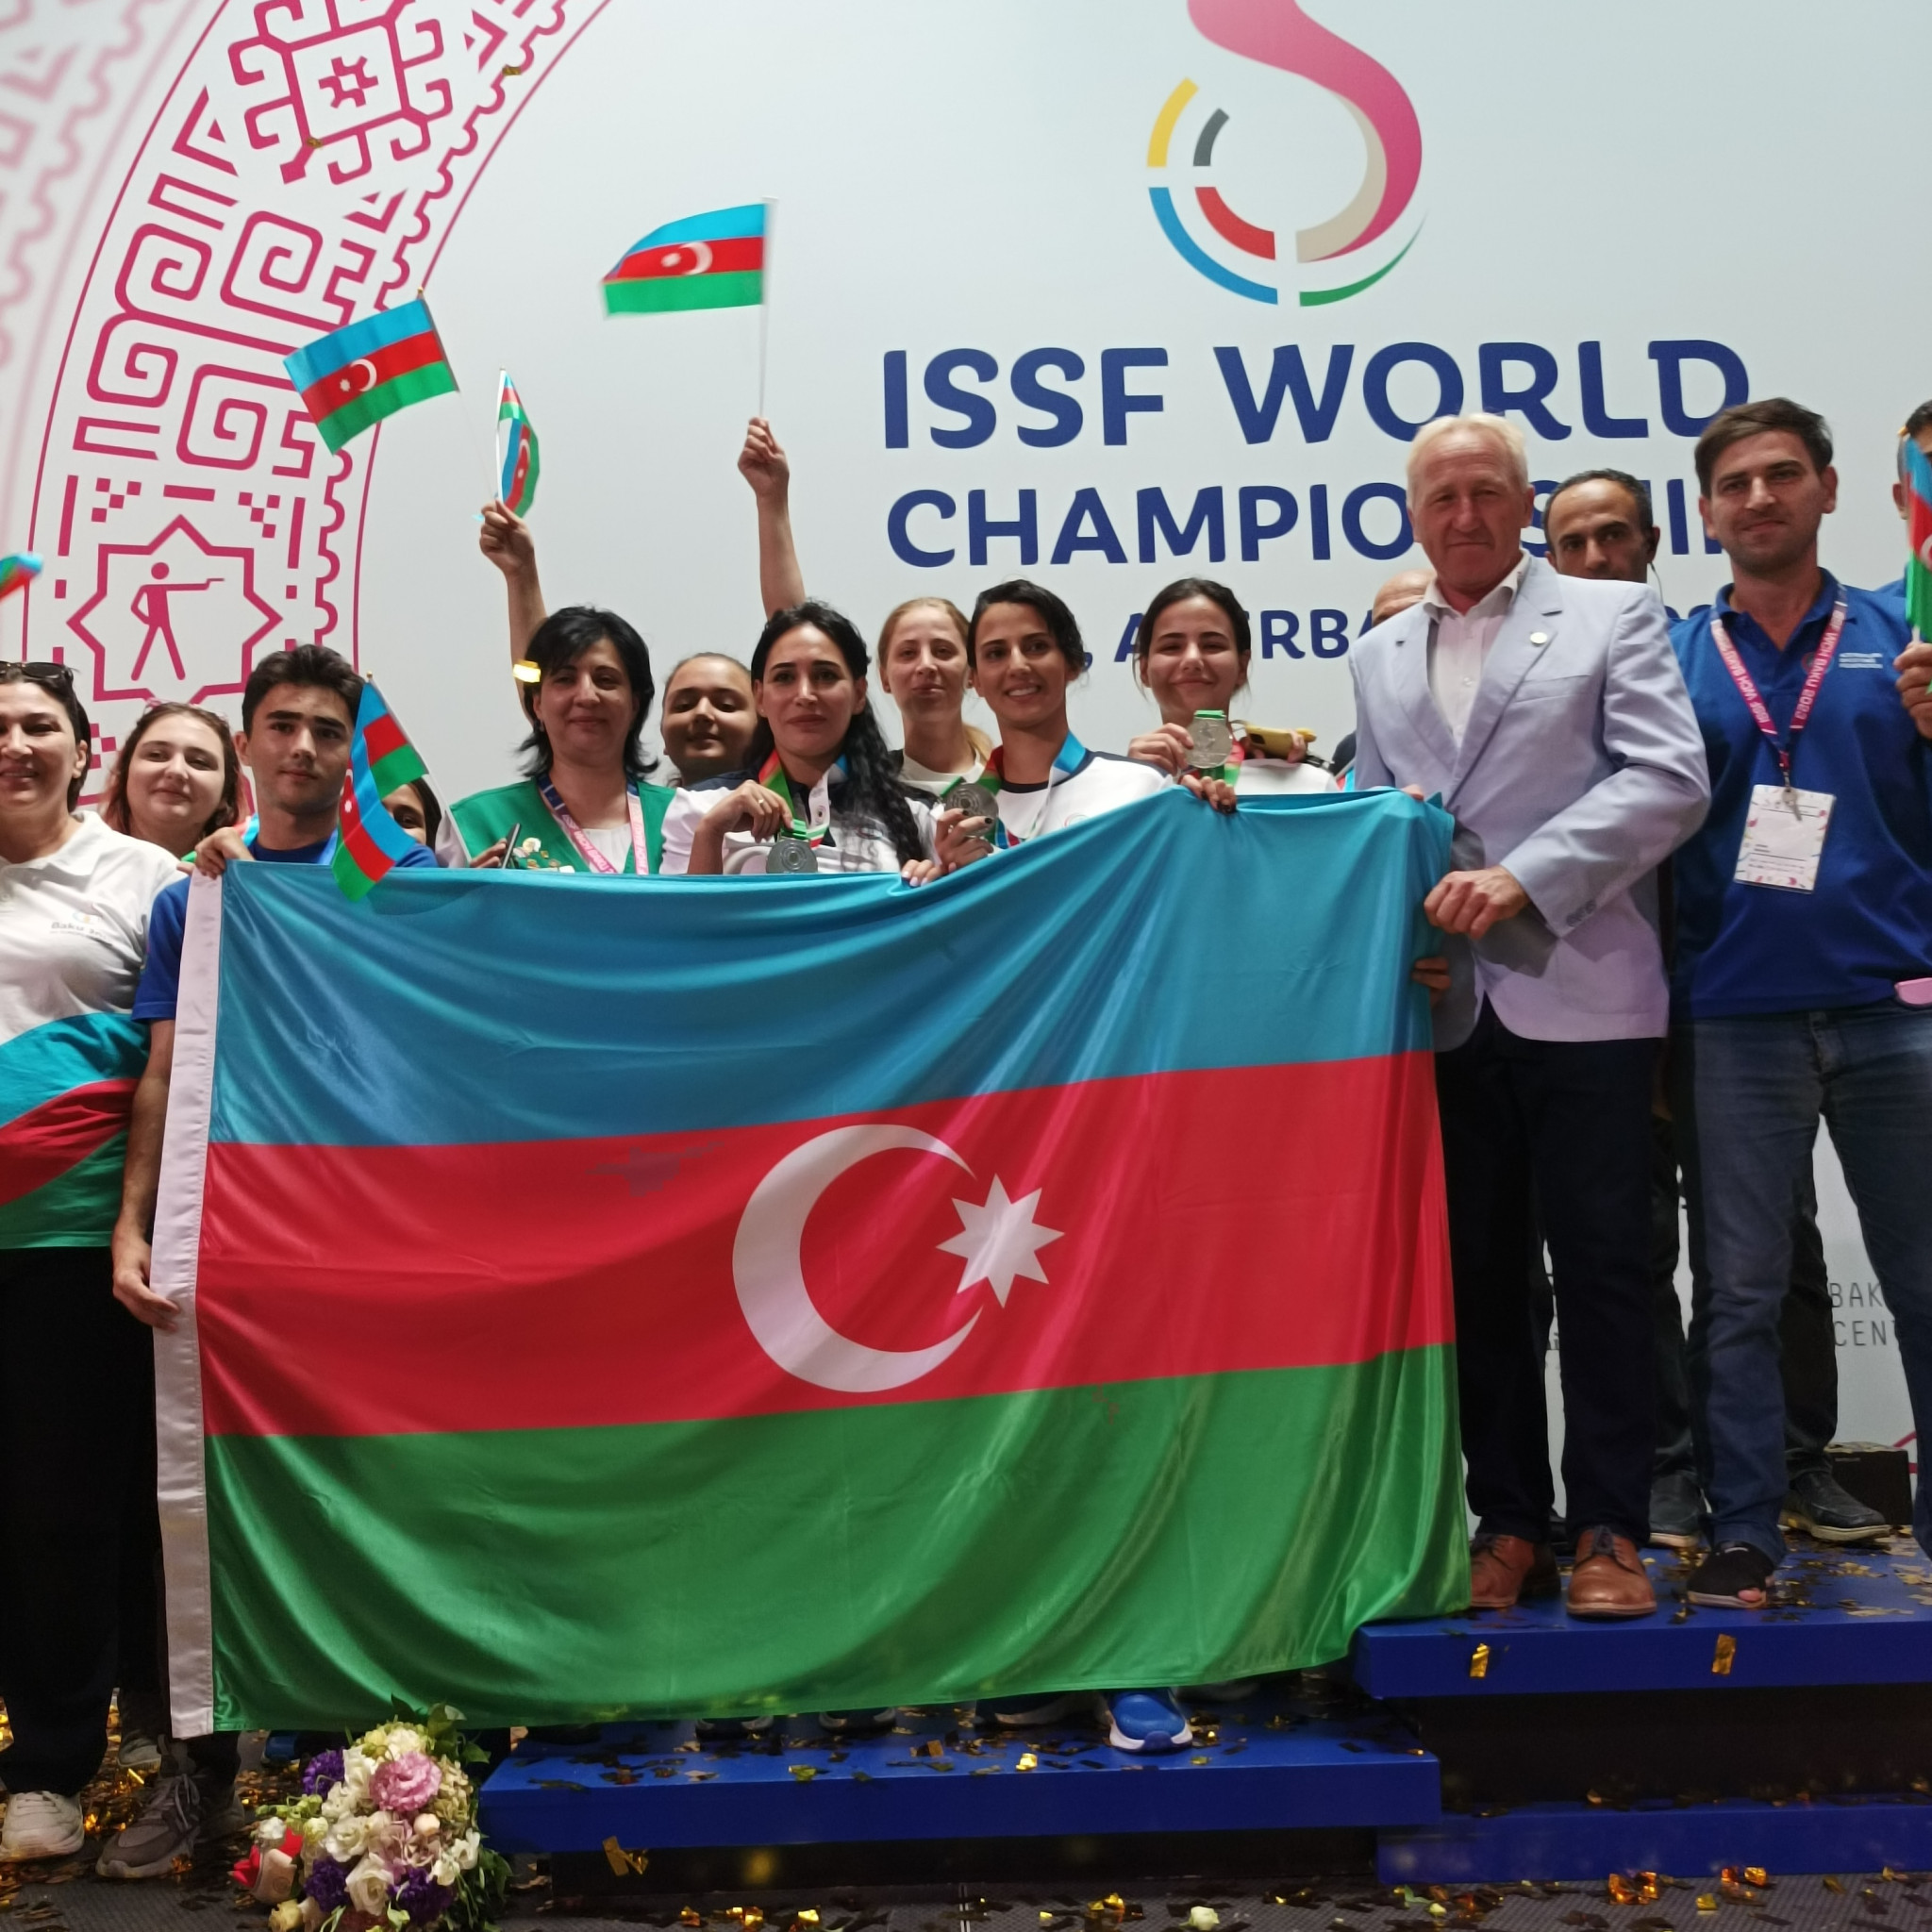 Azerbaijan's first medal of the ISSF World Championships prompted celebrations on the podium ©ITG